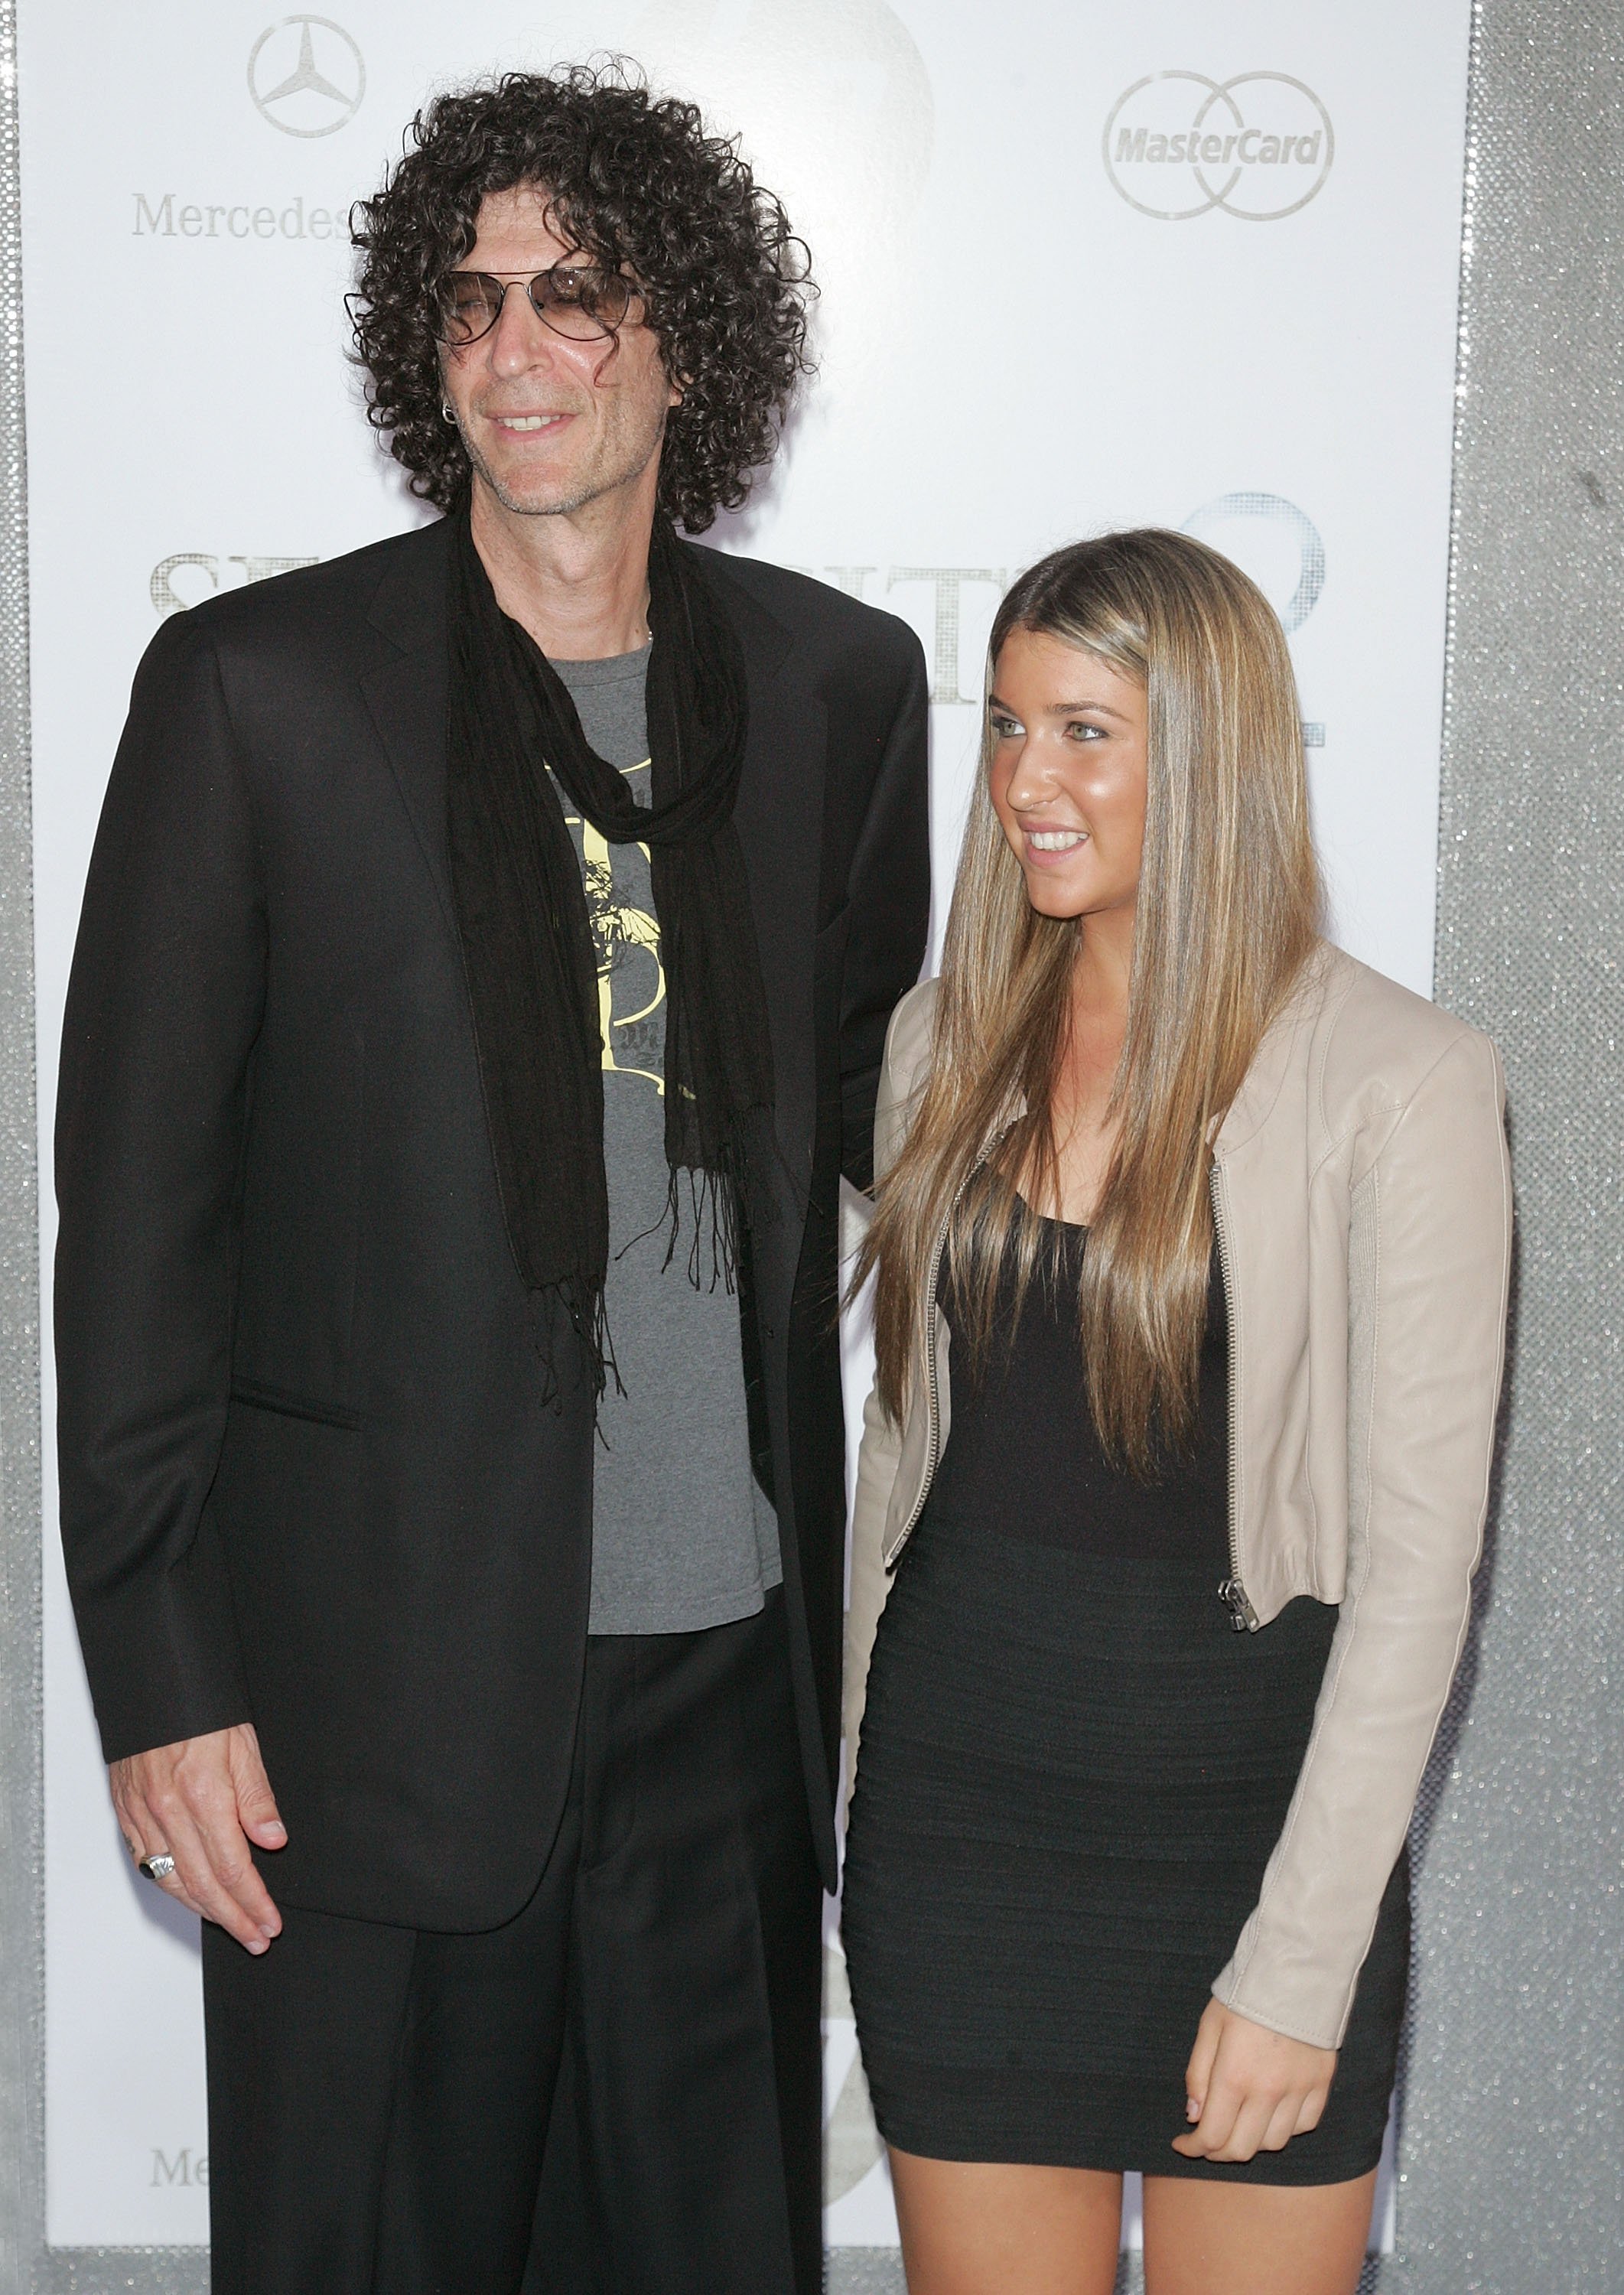 Howard Stern and Ashley Stern attend the premiere of “Sex and the City 2,” at Radio City Music Hall, on May 24, 2010, in New York City. | Source: Getty Images